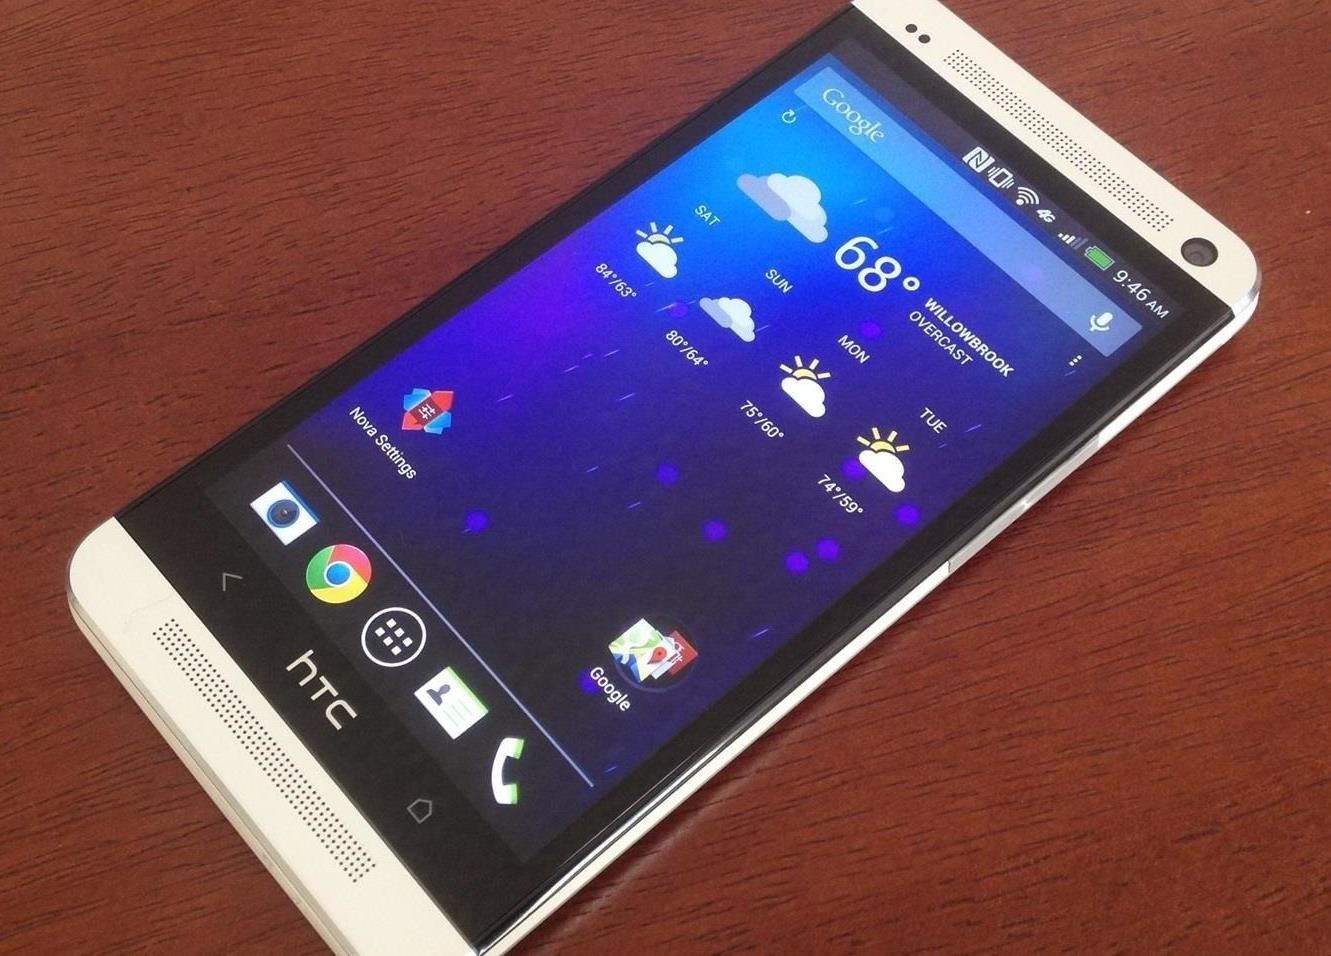 How to De-Bloat Your HTC One to Get a Familiar Stock Android UI—Without Rooting